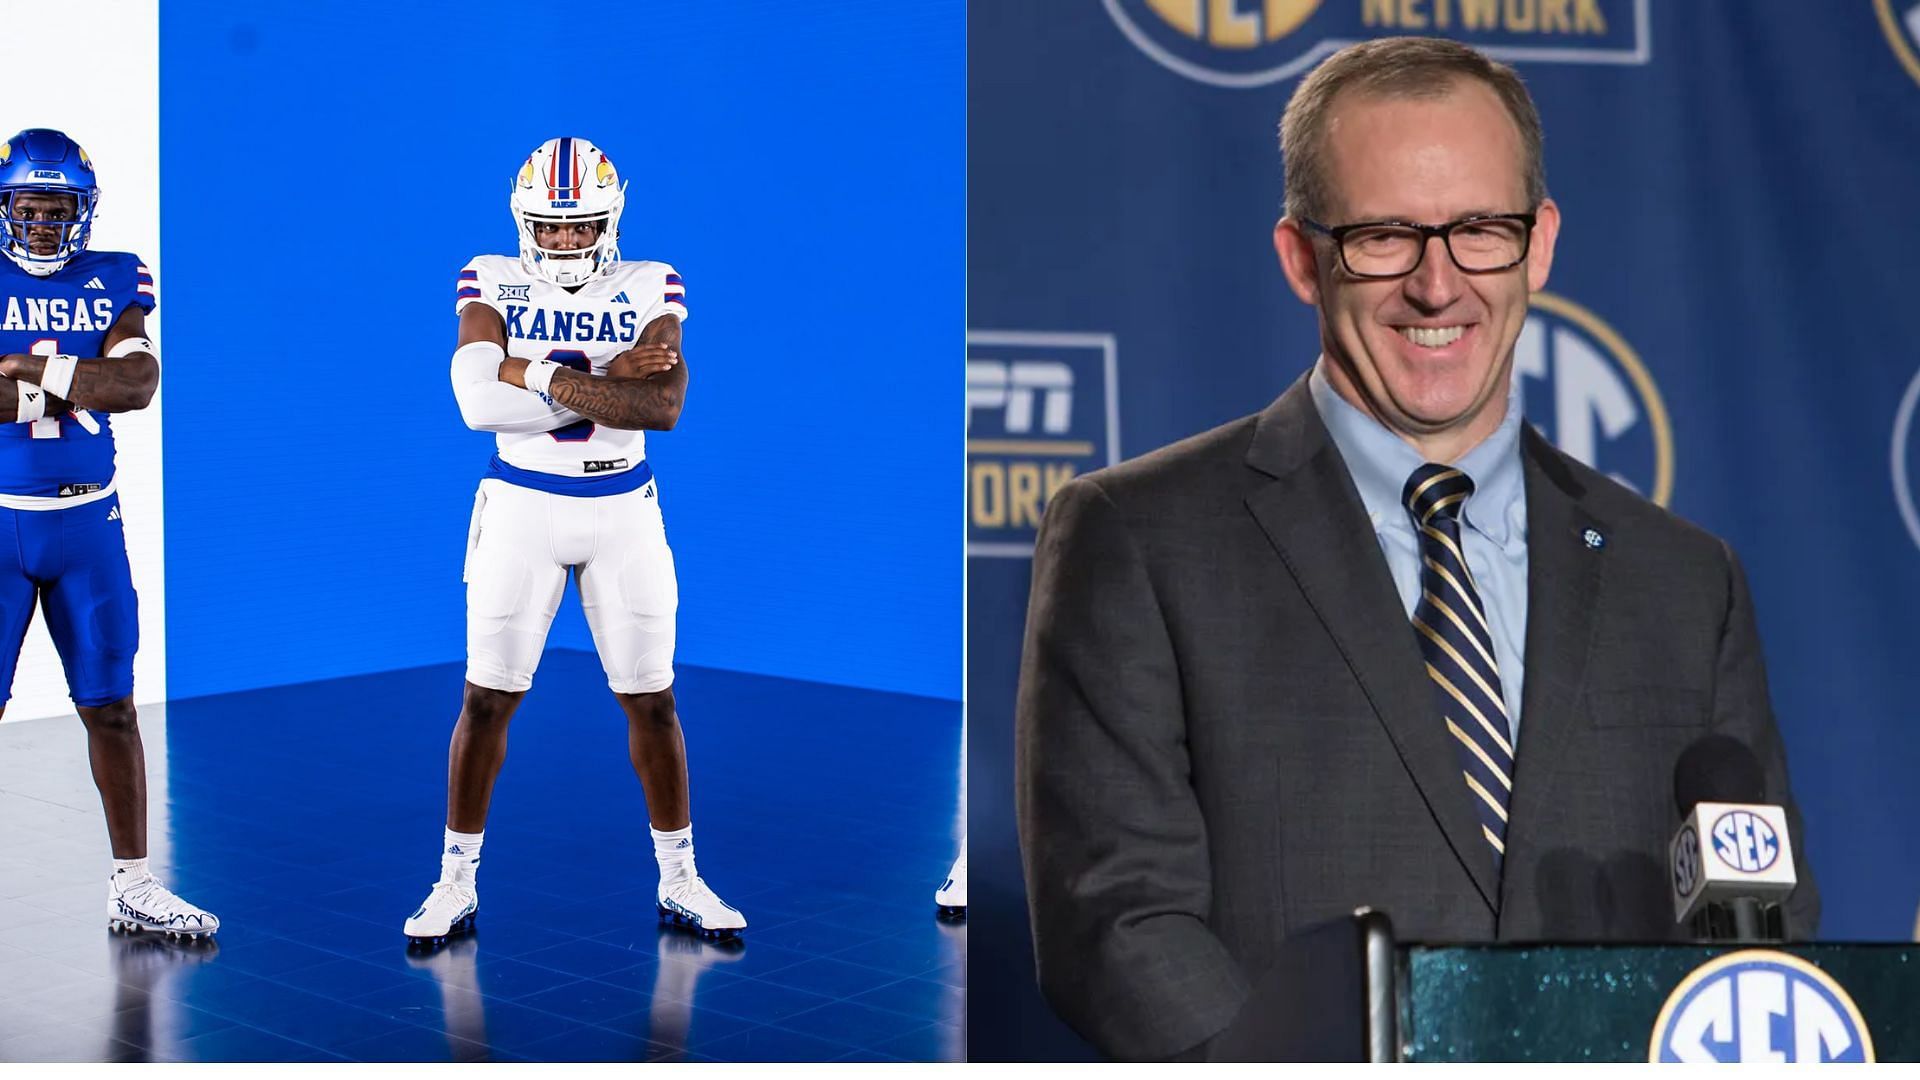 Is Kansas to SEC a potential move in Greg Sankey